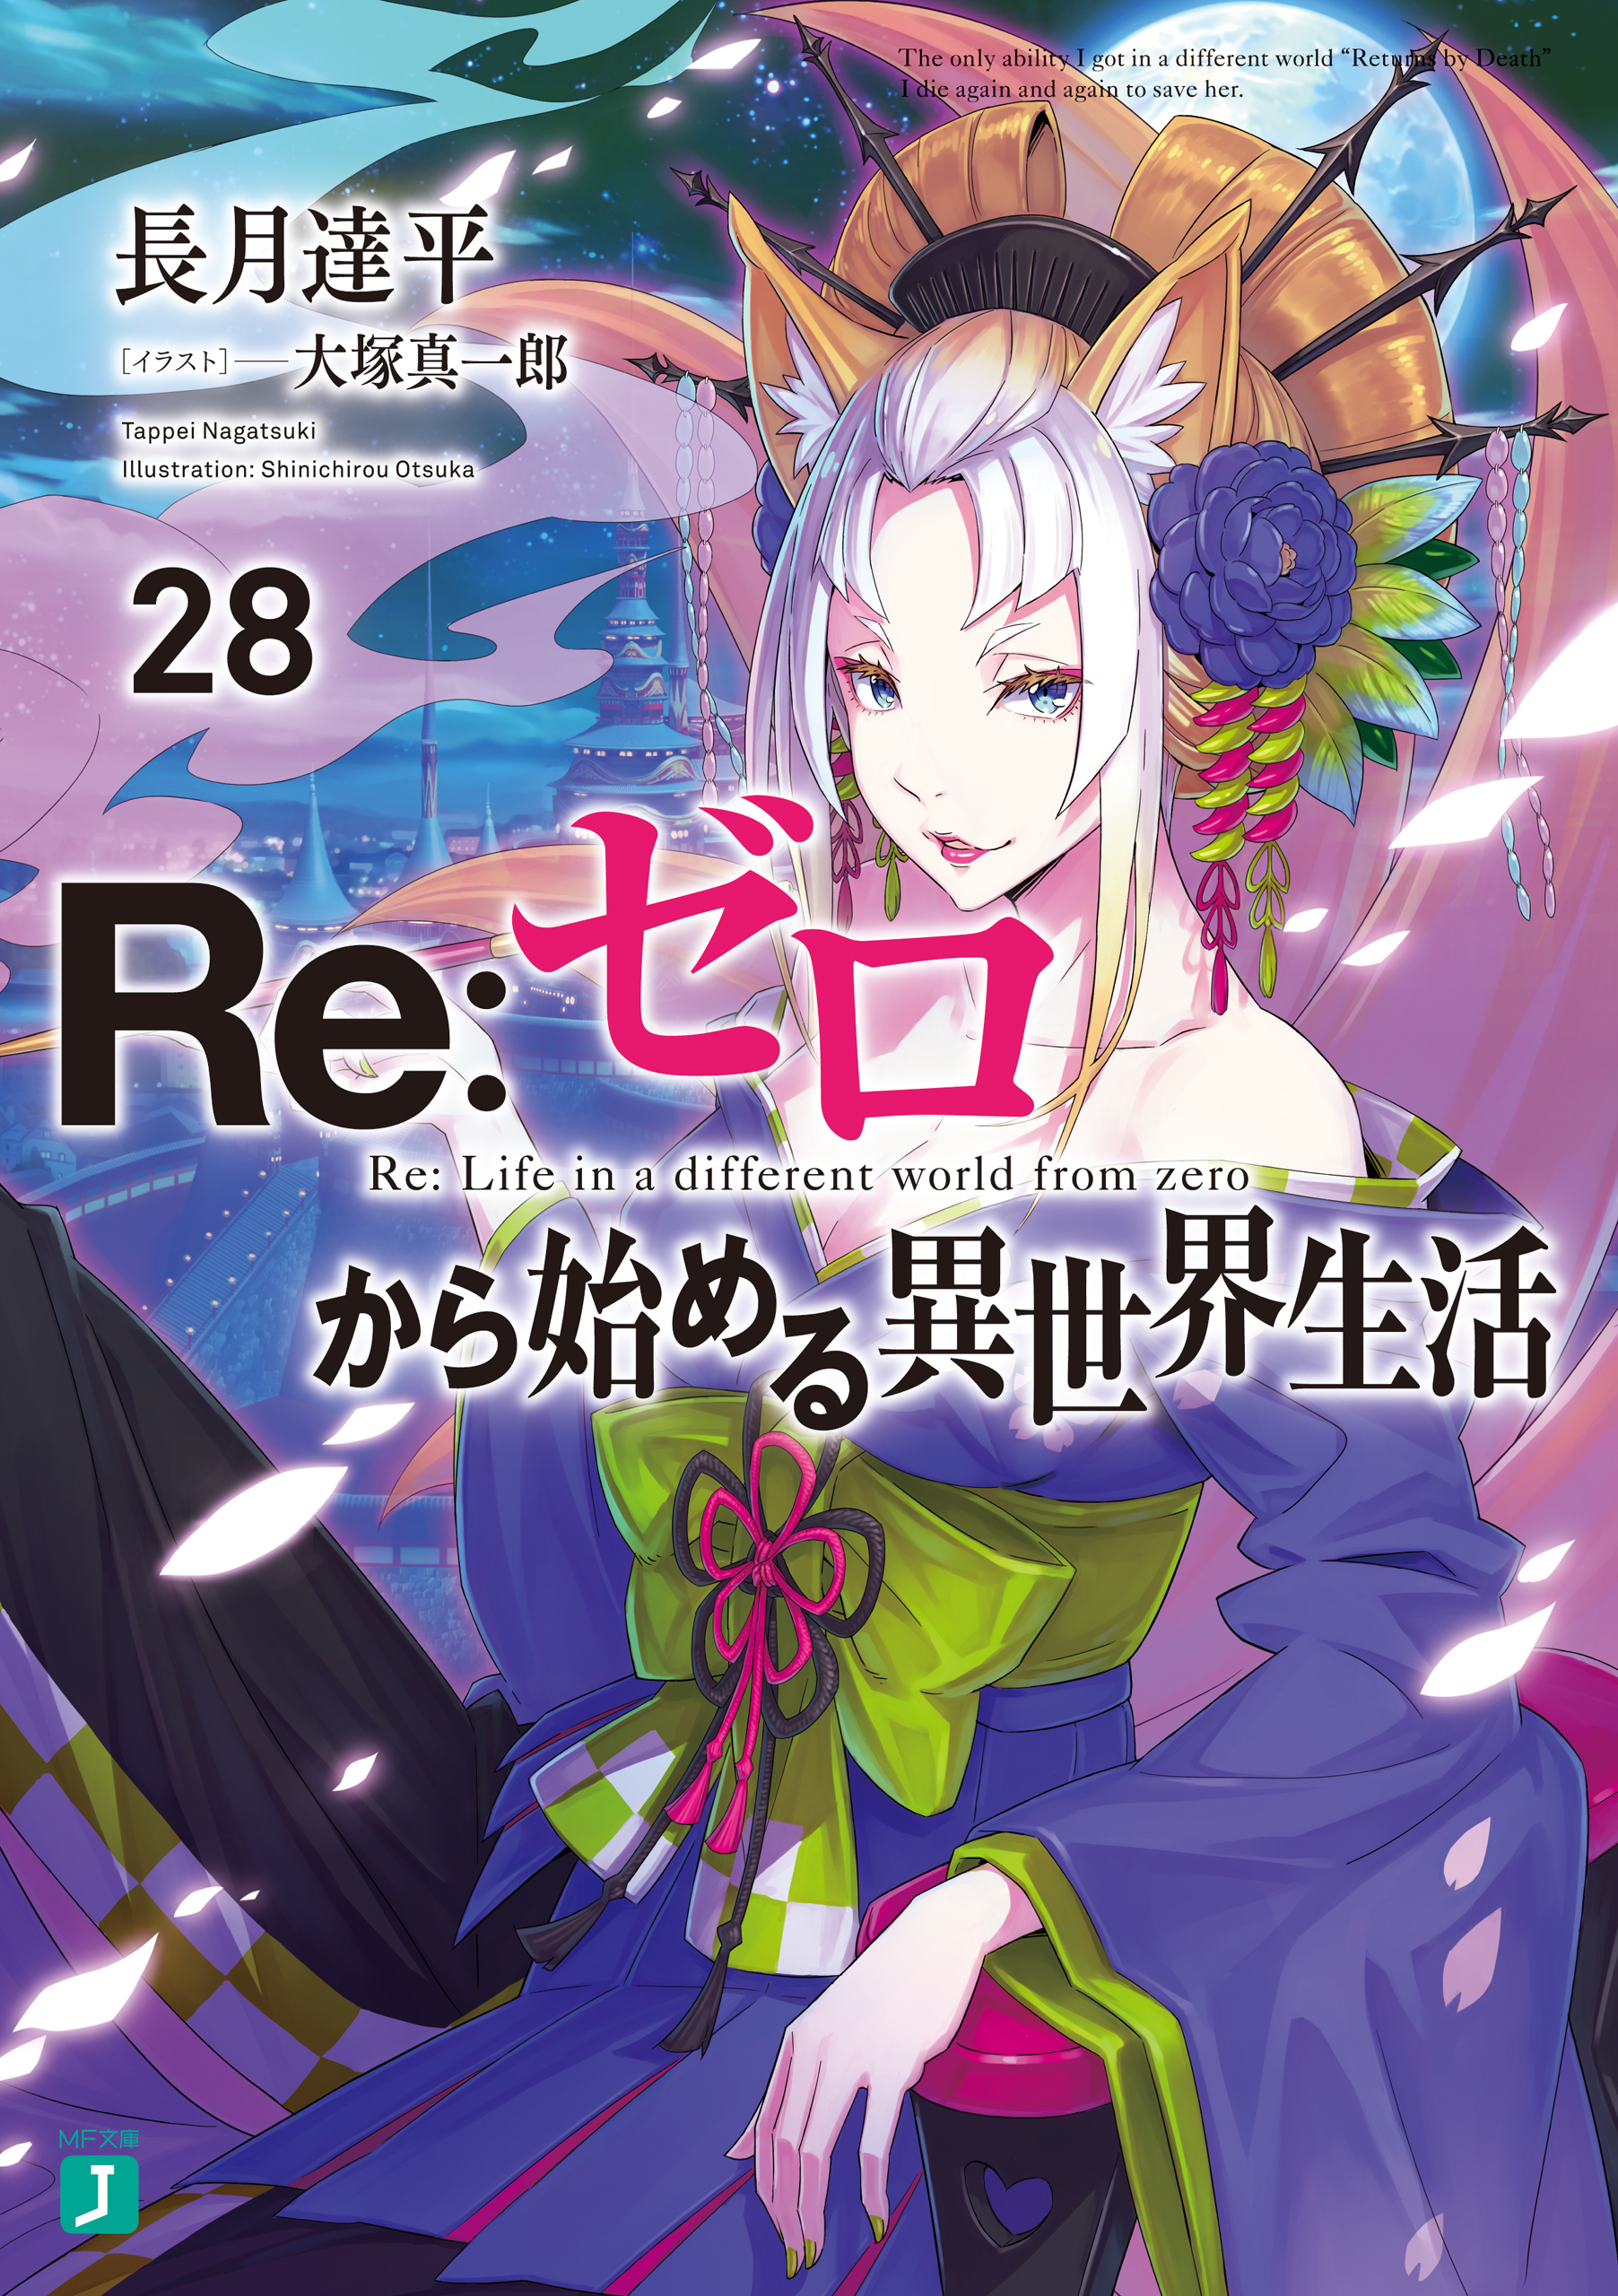 Re: Zero: 10 Things You Never Knew About The Making Of The Dark Isekai Anime